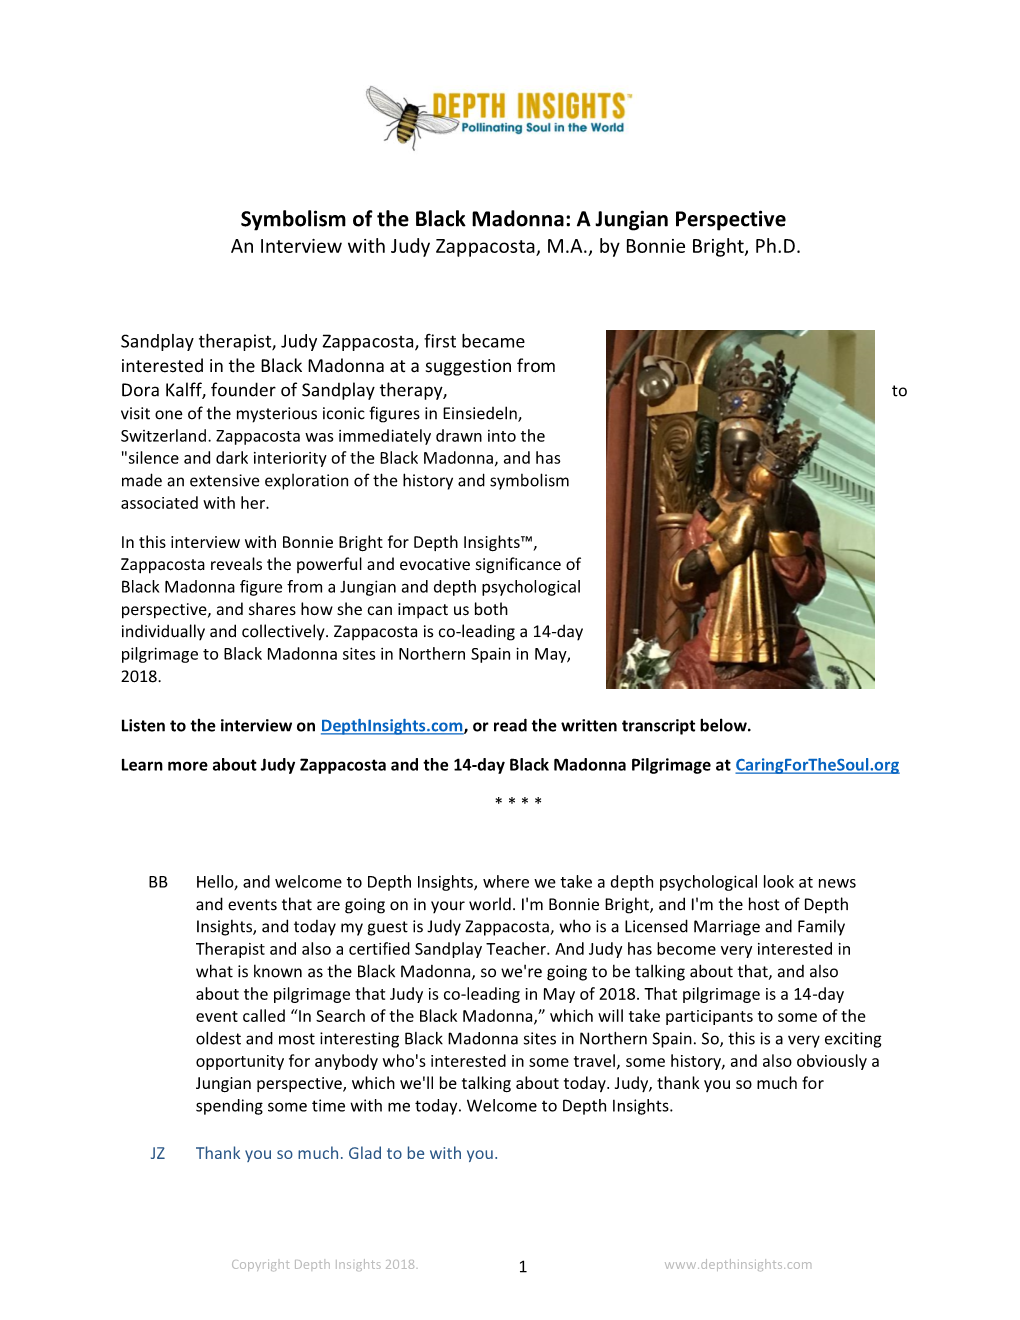 Symbolism of the Black Madonna: a Jungian Perspective an Interview with Judy Zappacosta, M.A., by Bonnie Bright, Ph.D